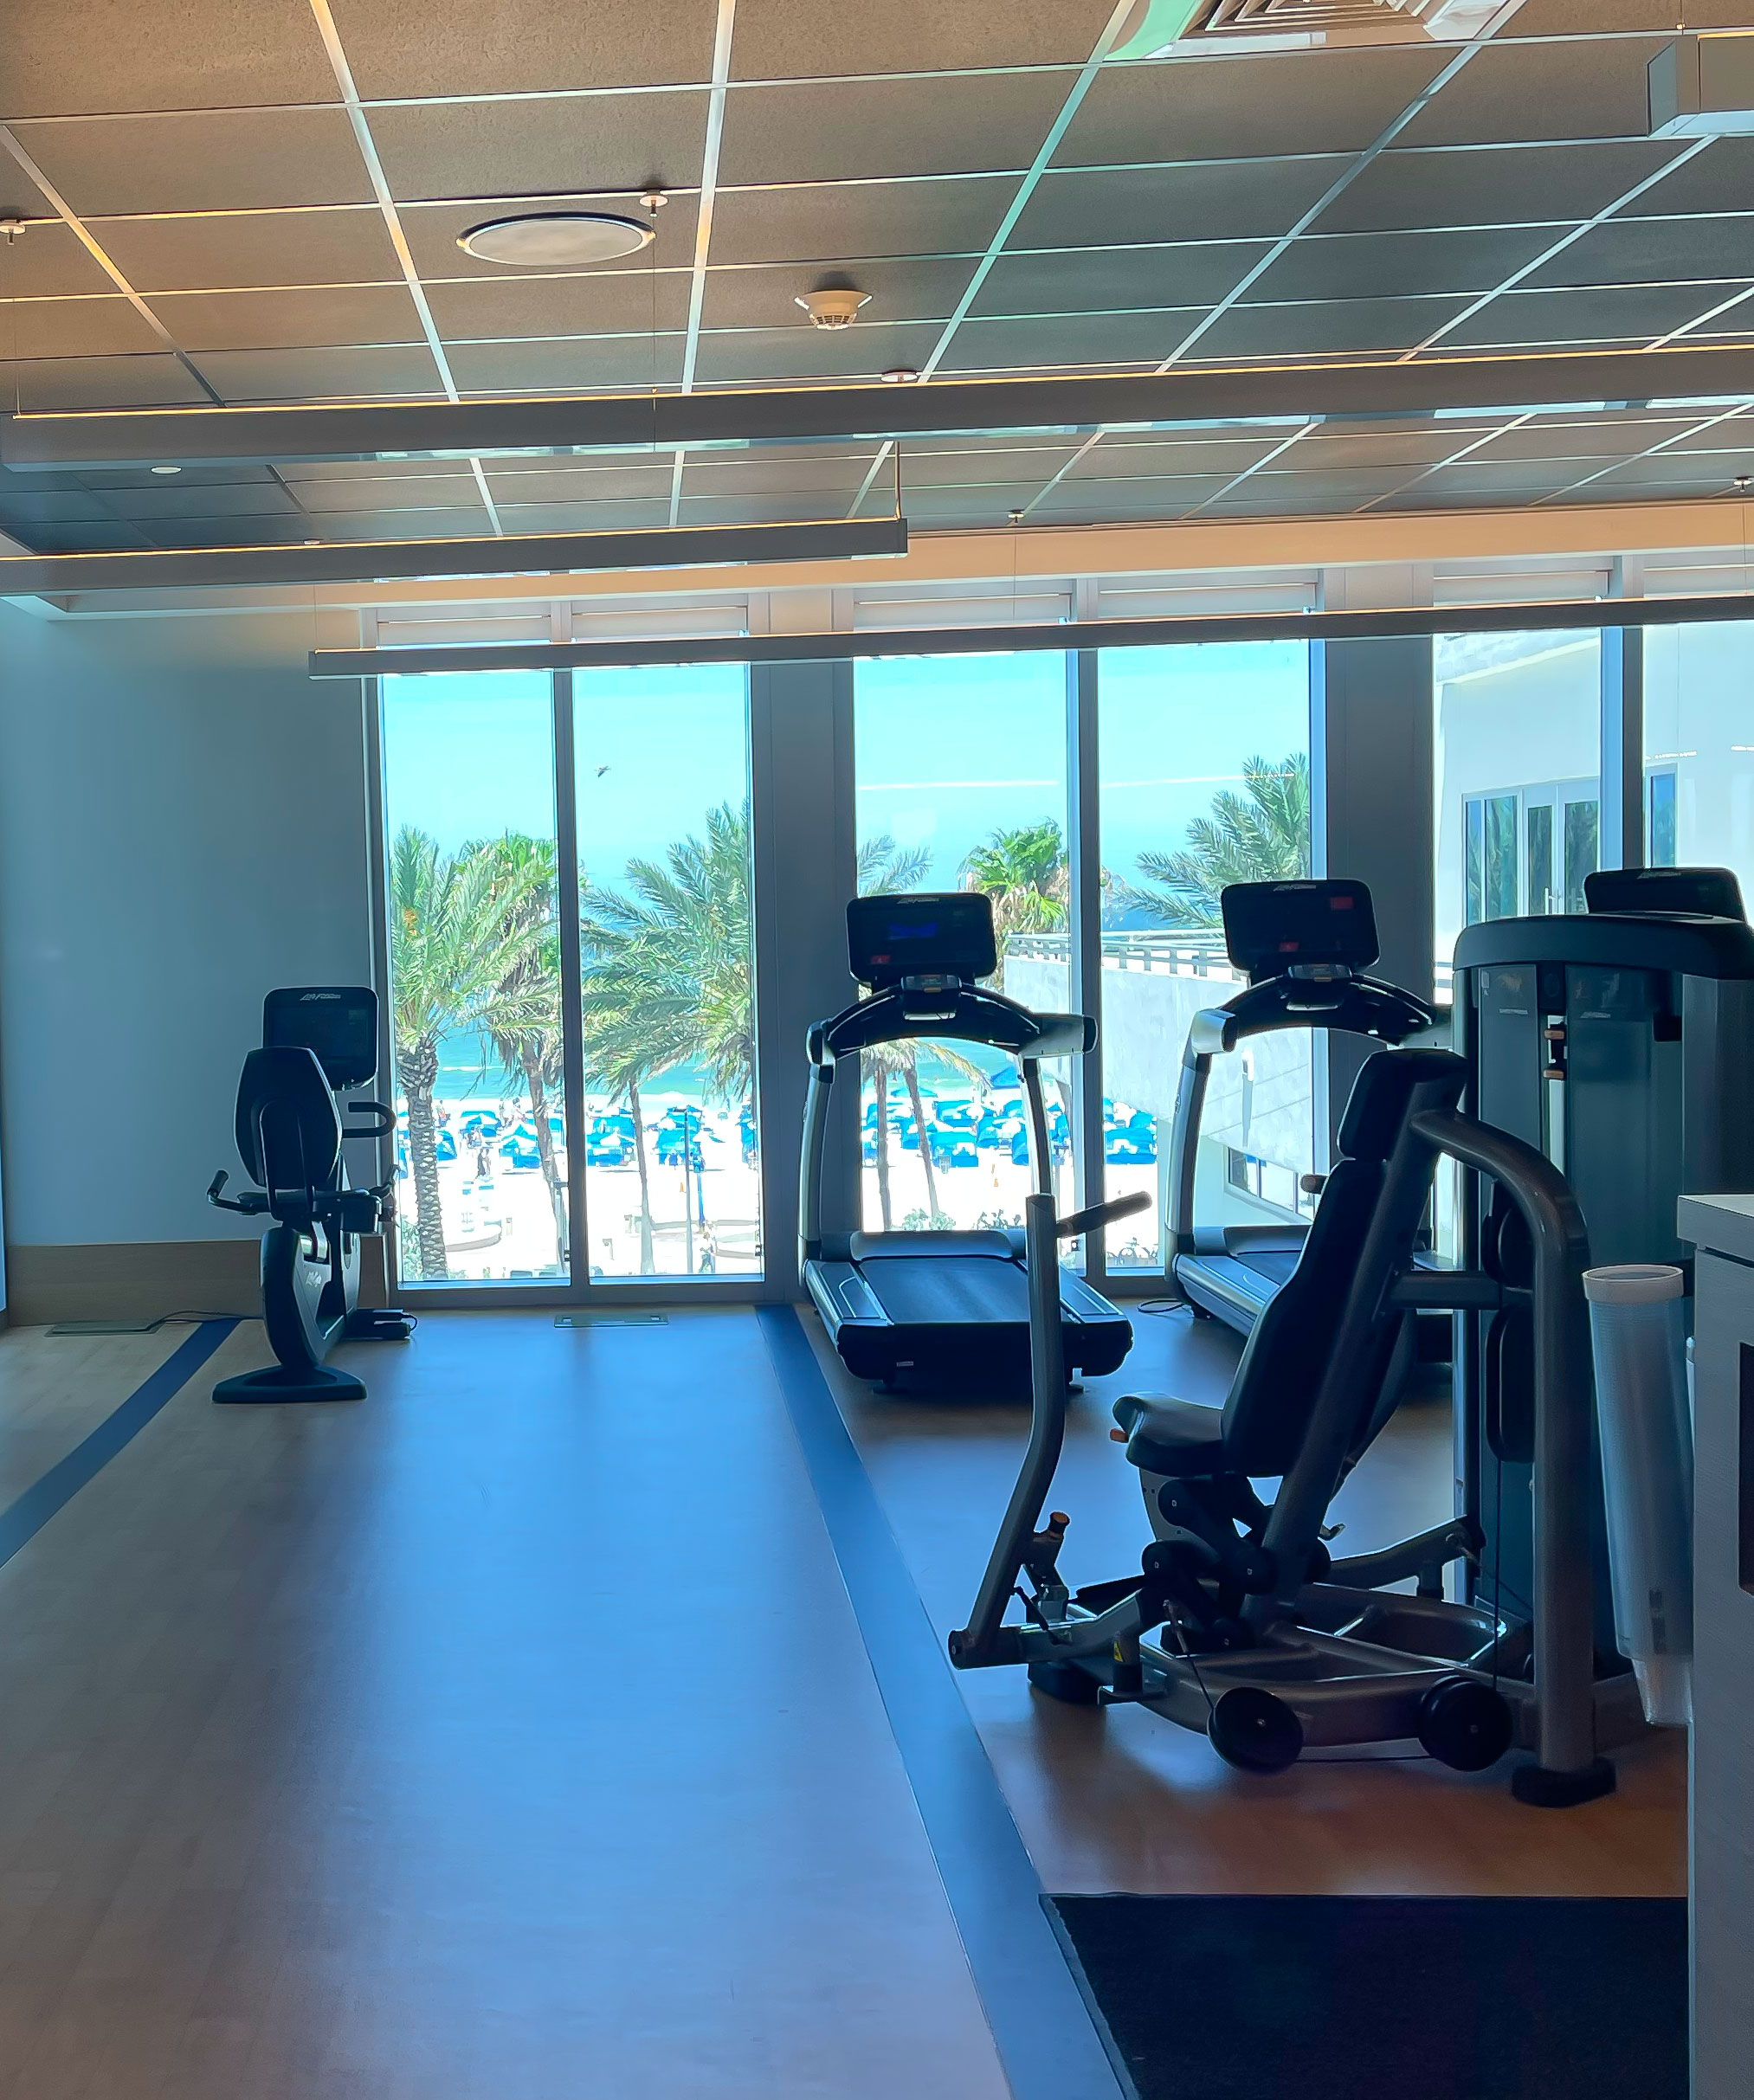 Wyndham Grand Clearwater Beach Gym with a view of the pool and clearwater beach.